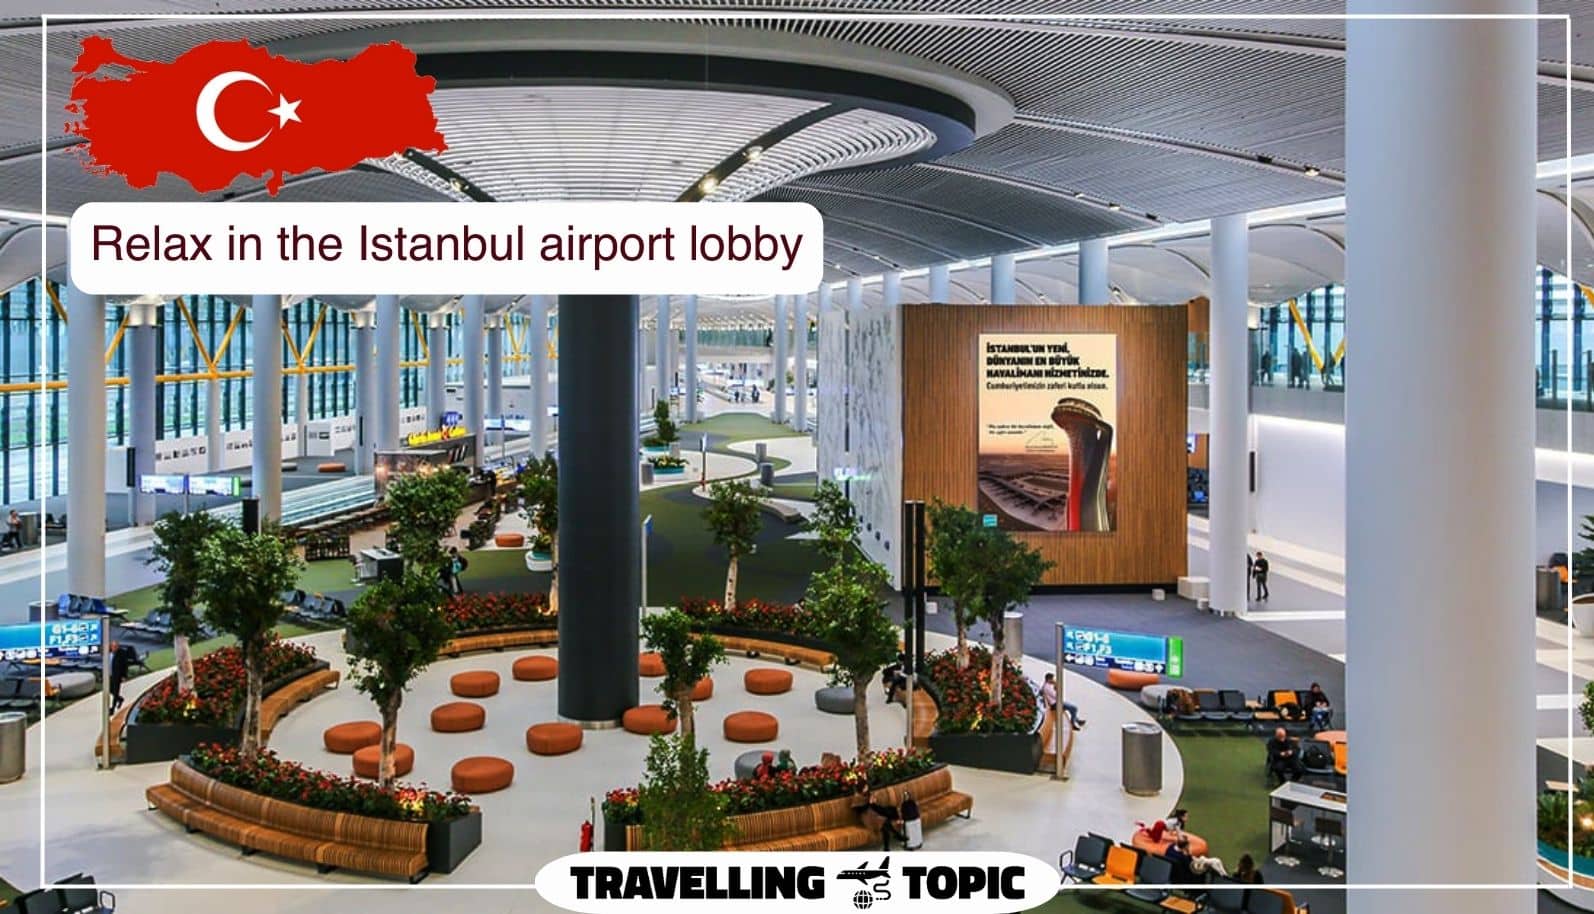 Relax in the Istanbul airport lobby